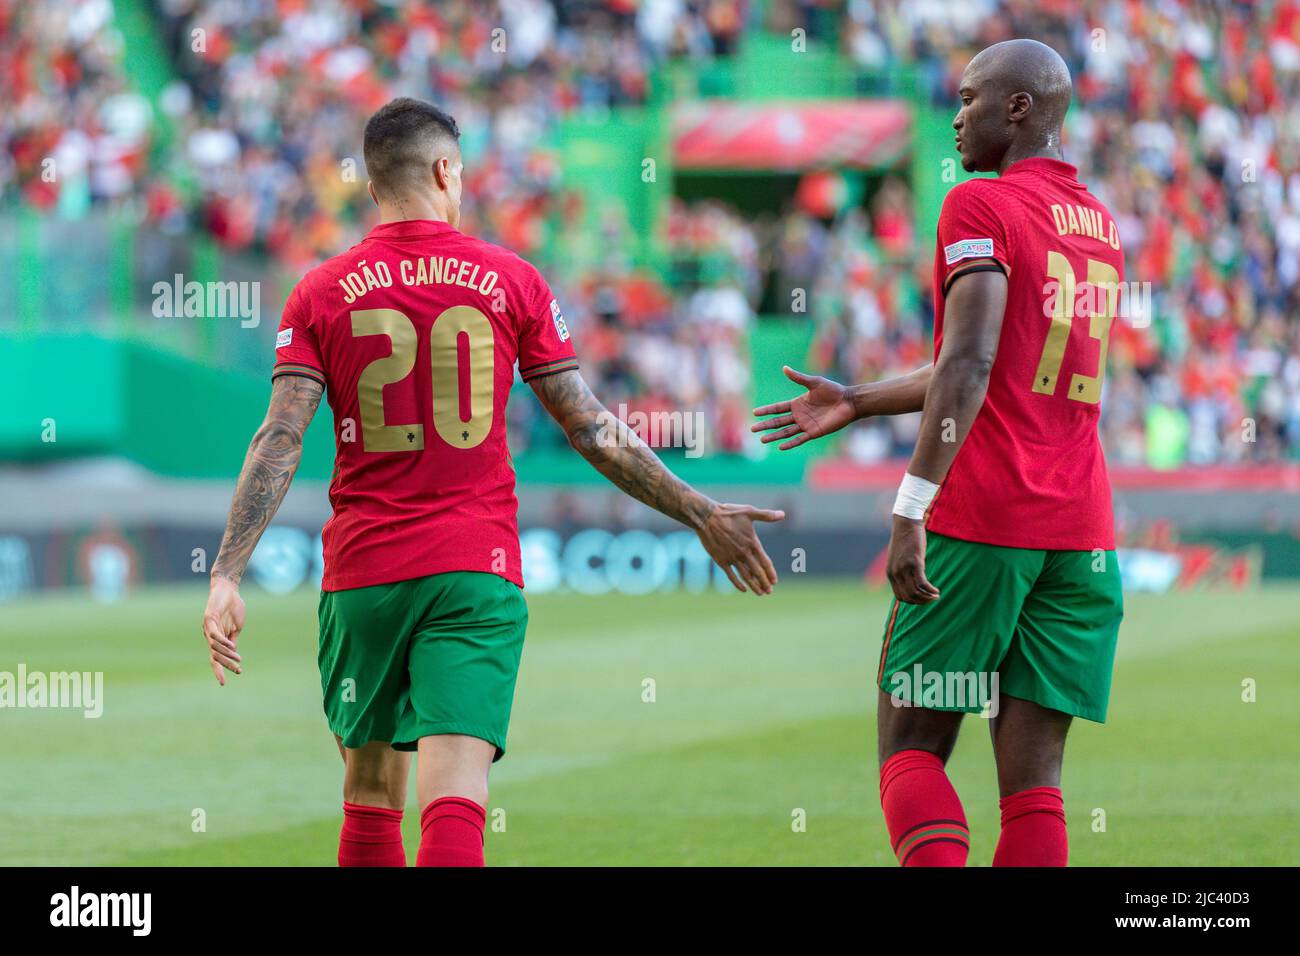 June 09, 2022. Lisbon, Portugal. Portugal's and Manchester City defender Joao Cancelo (20) celebrating after scoring a goal with Portugal's and Paris Saint-Germain midfielder Danilo Pereira (13) during the UEFA Nations League Final Tournament between Portugal and Czechia Credit: Alexandre de Sousa/Alamy Live News Stock Photo